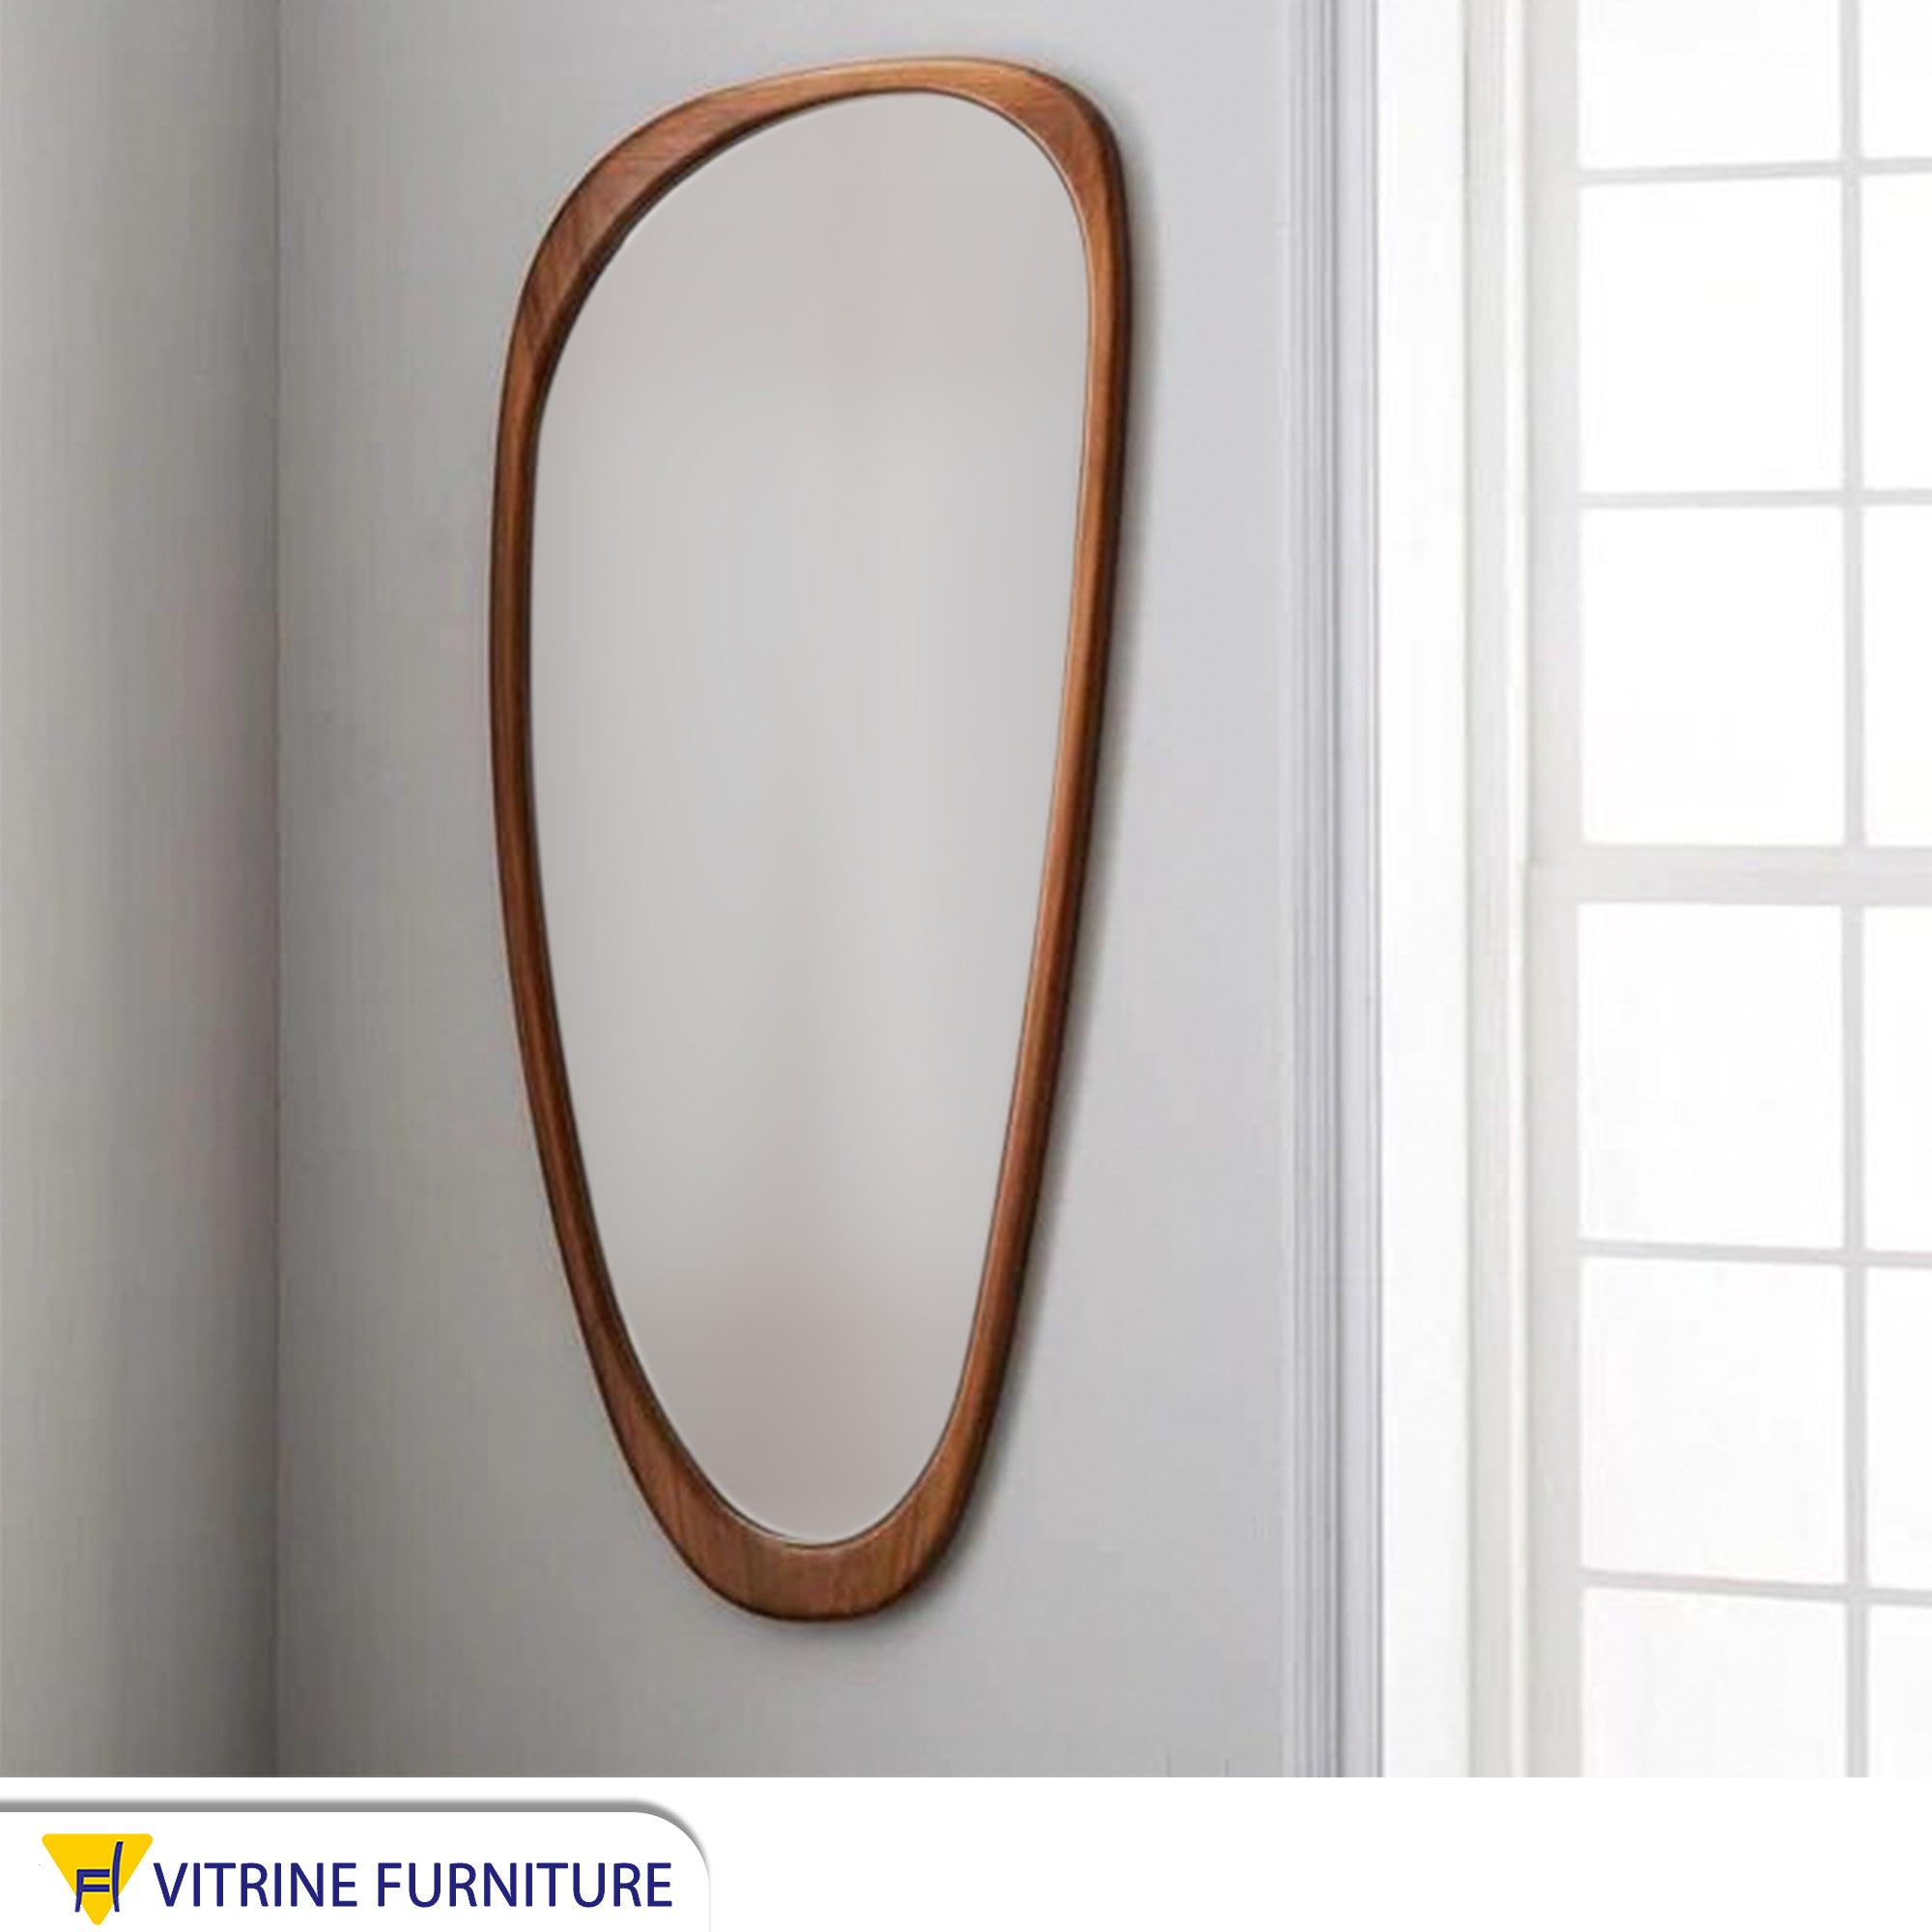 Modern aesthetic mirror 60*160 with brown frame